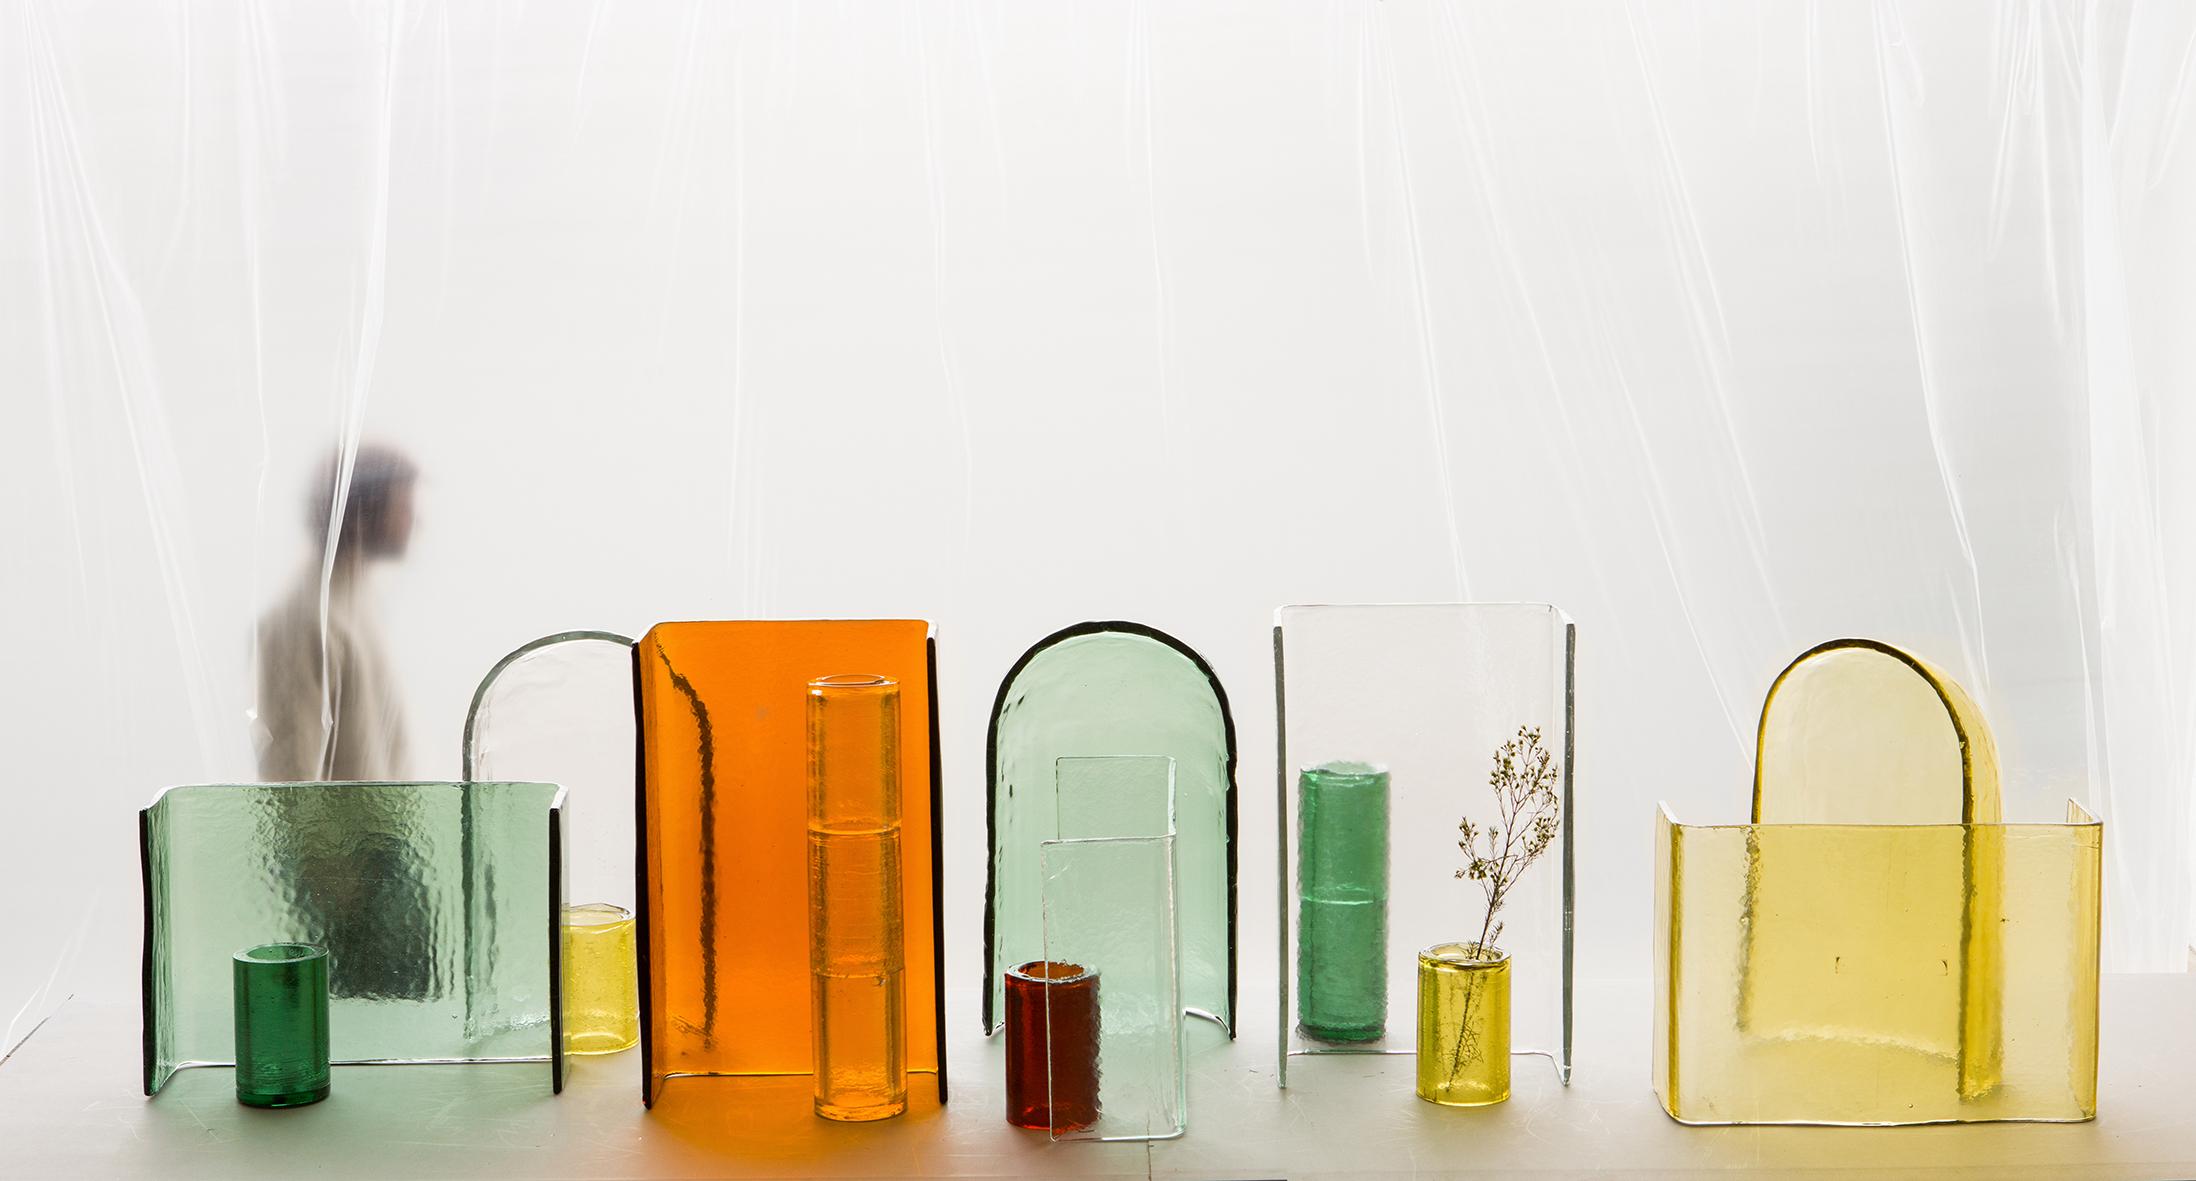 Alcova set 03
1 x Alcova Amber
1 x Vaso L Crystal
1 x Cilindro L Green
1 x Cilindro S Crystal

Alcova is a collection of handcrafted, geometric objects that when grouped create intimate landscapes. Ronan and Erwan Bouroullec describe the